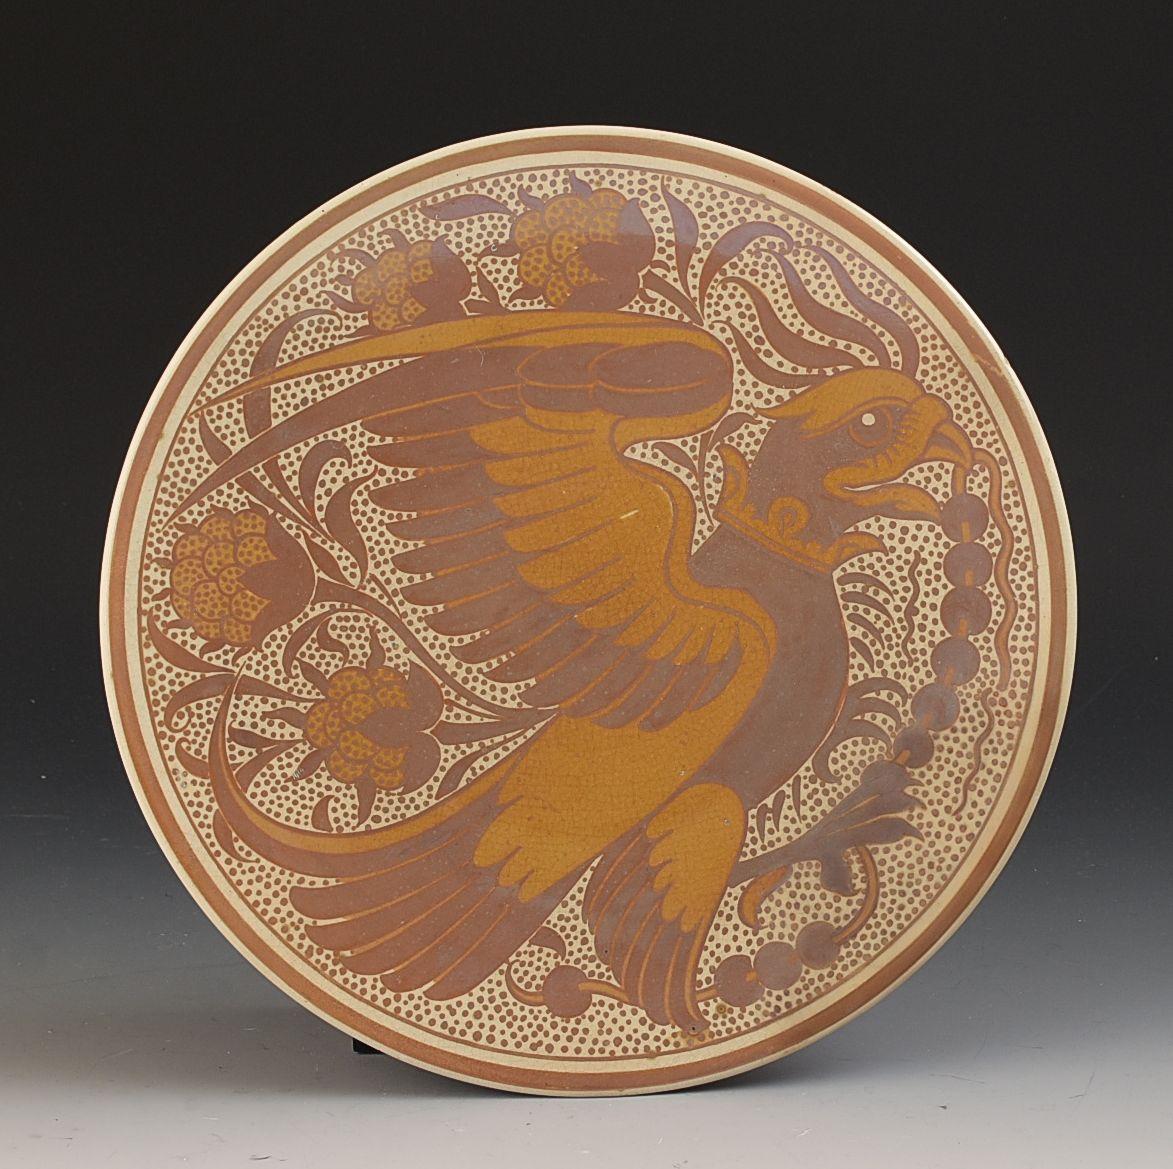 A superbly decorated 23cm diameter dish form plate designed by William De Morgan. This will date to the 1880s and shows an Eagle or similar amongst foliate decoration. There has been a minor and invisible restoration to the rim that does not in any